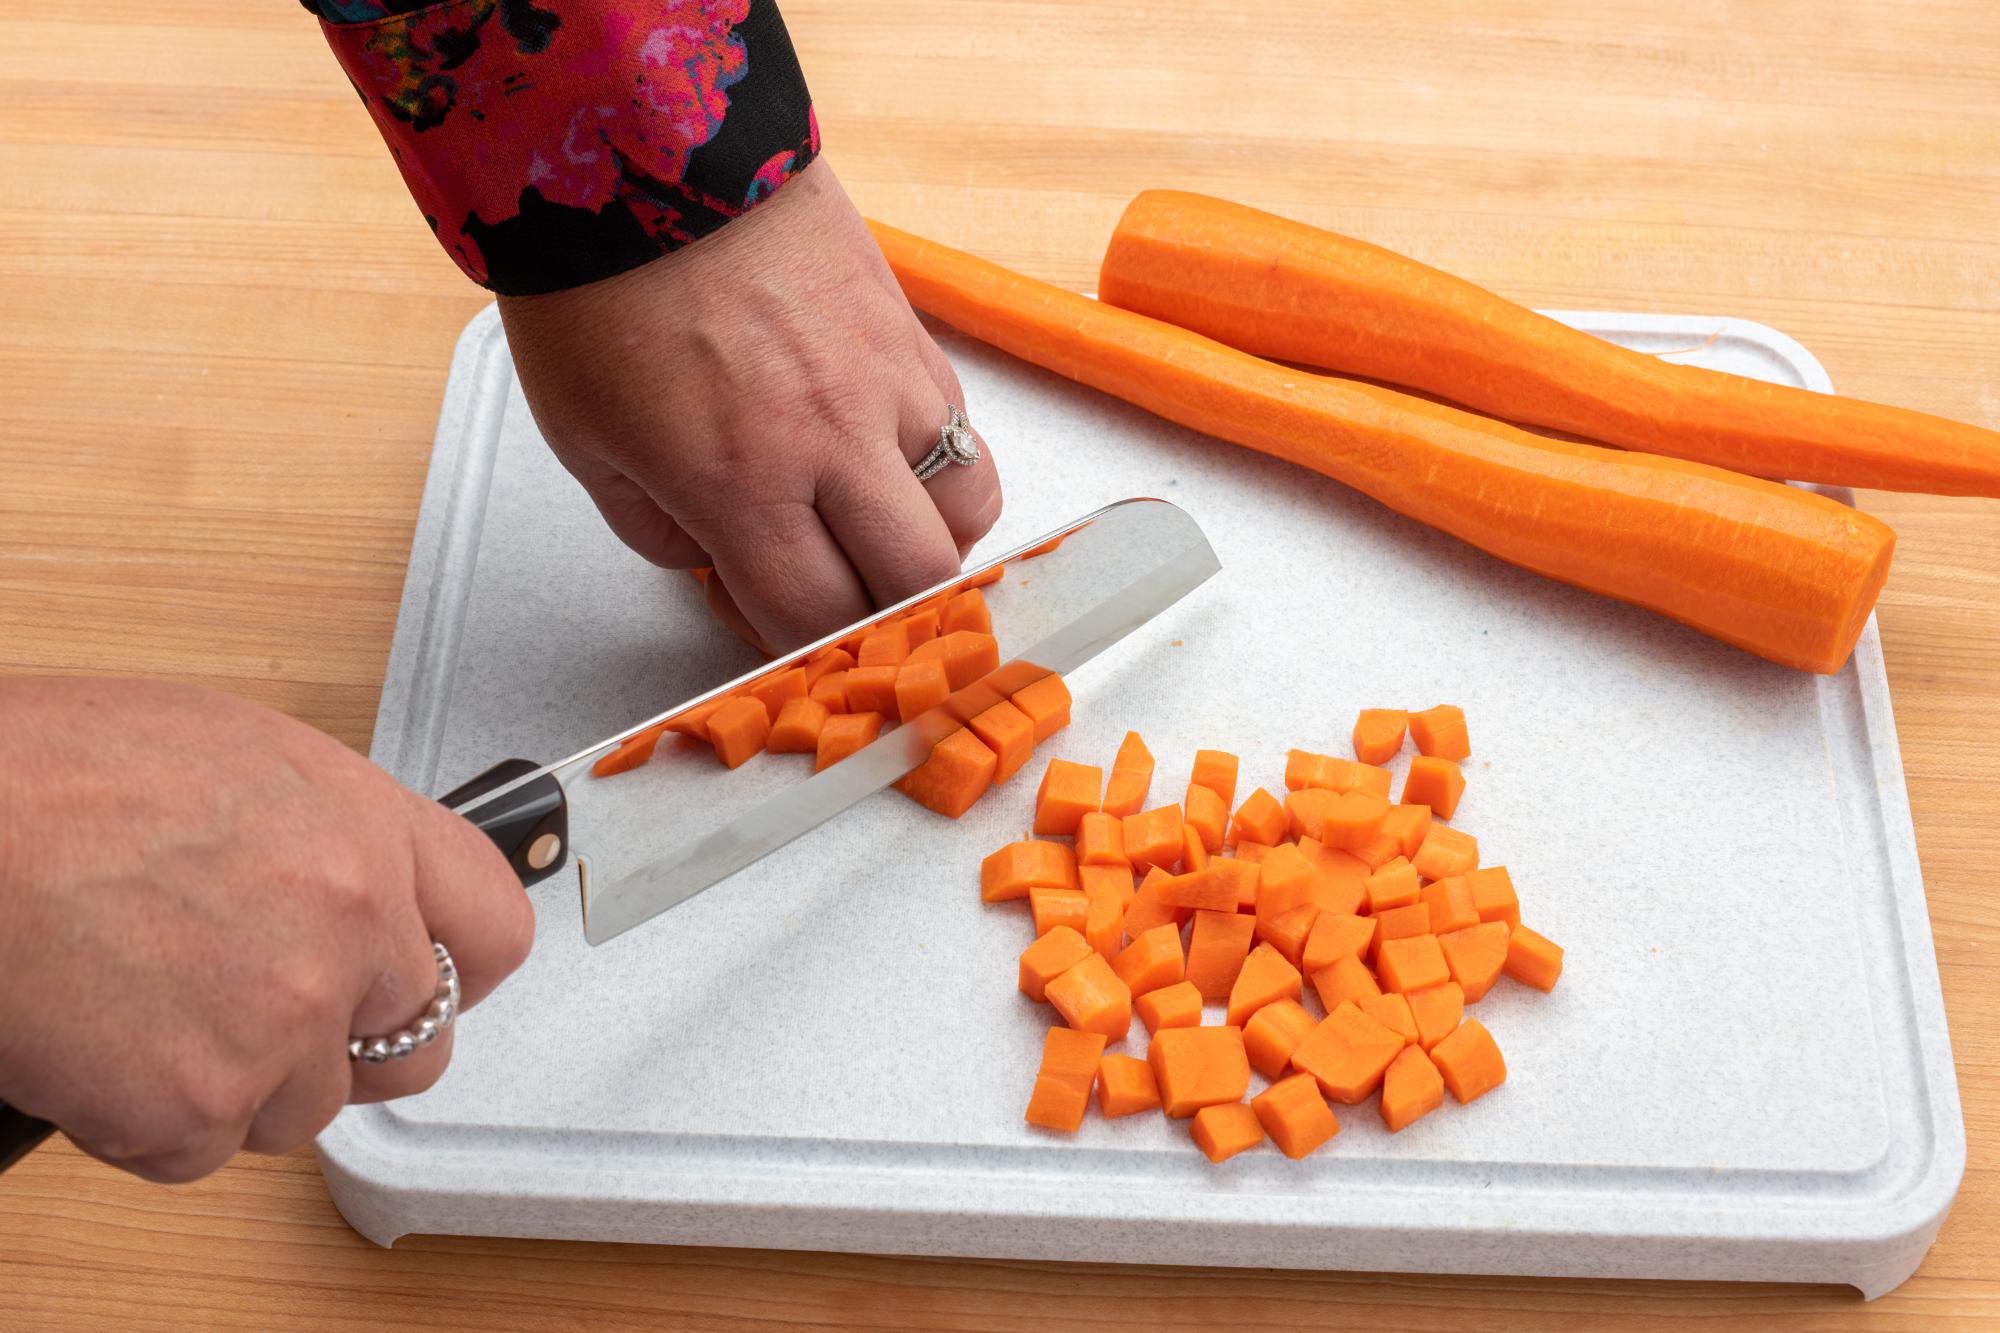 The 7 inch Santoku being used to dice up the carrots.